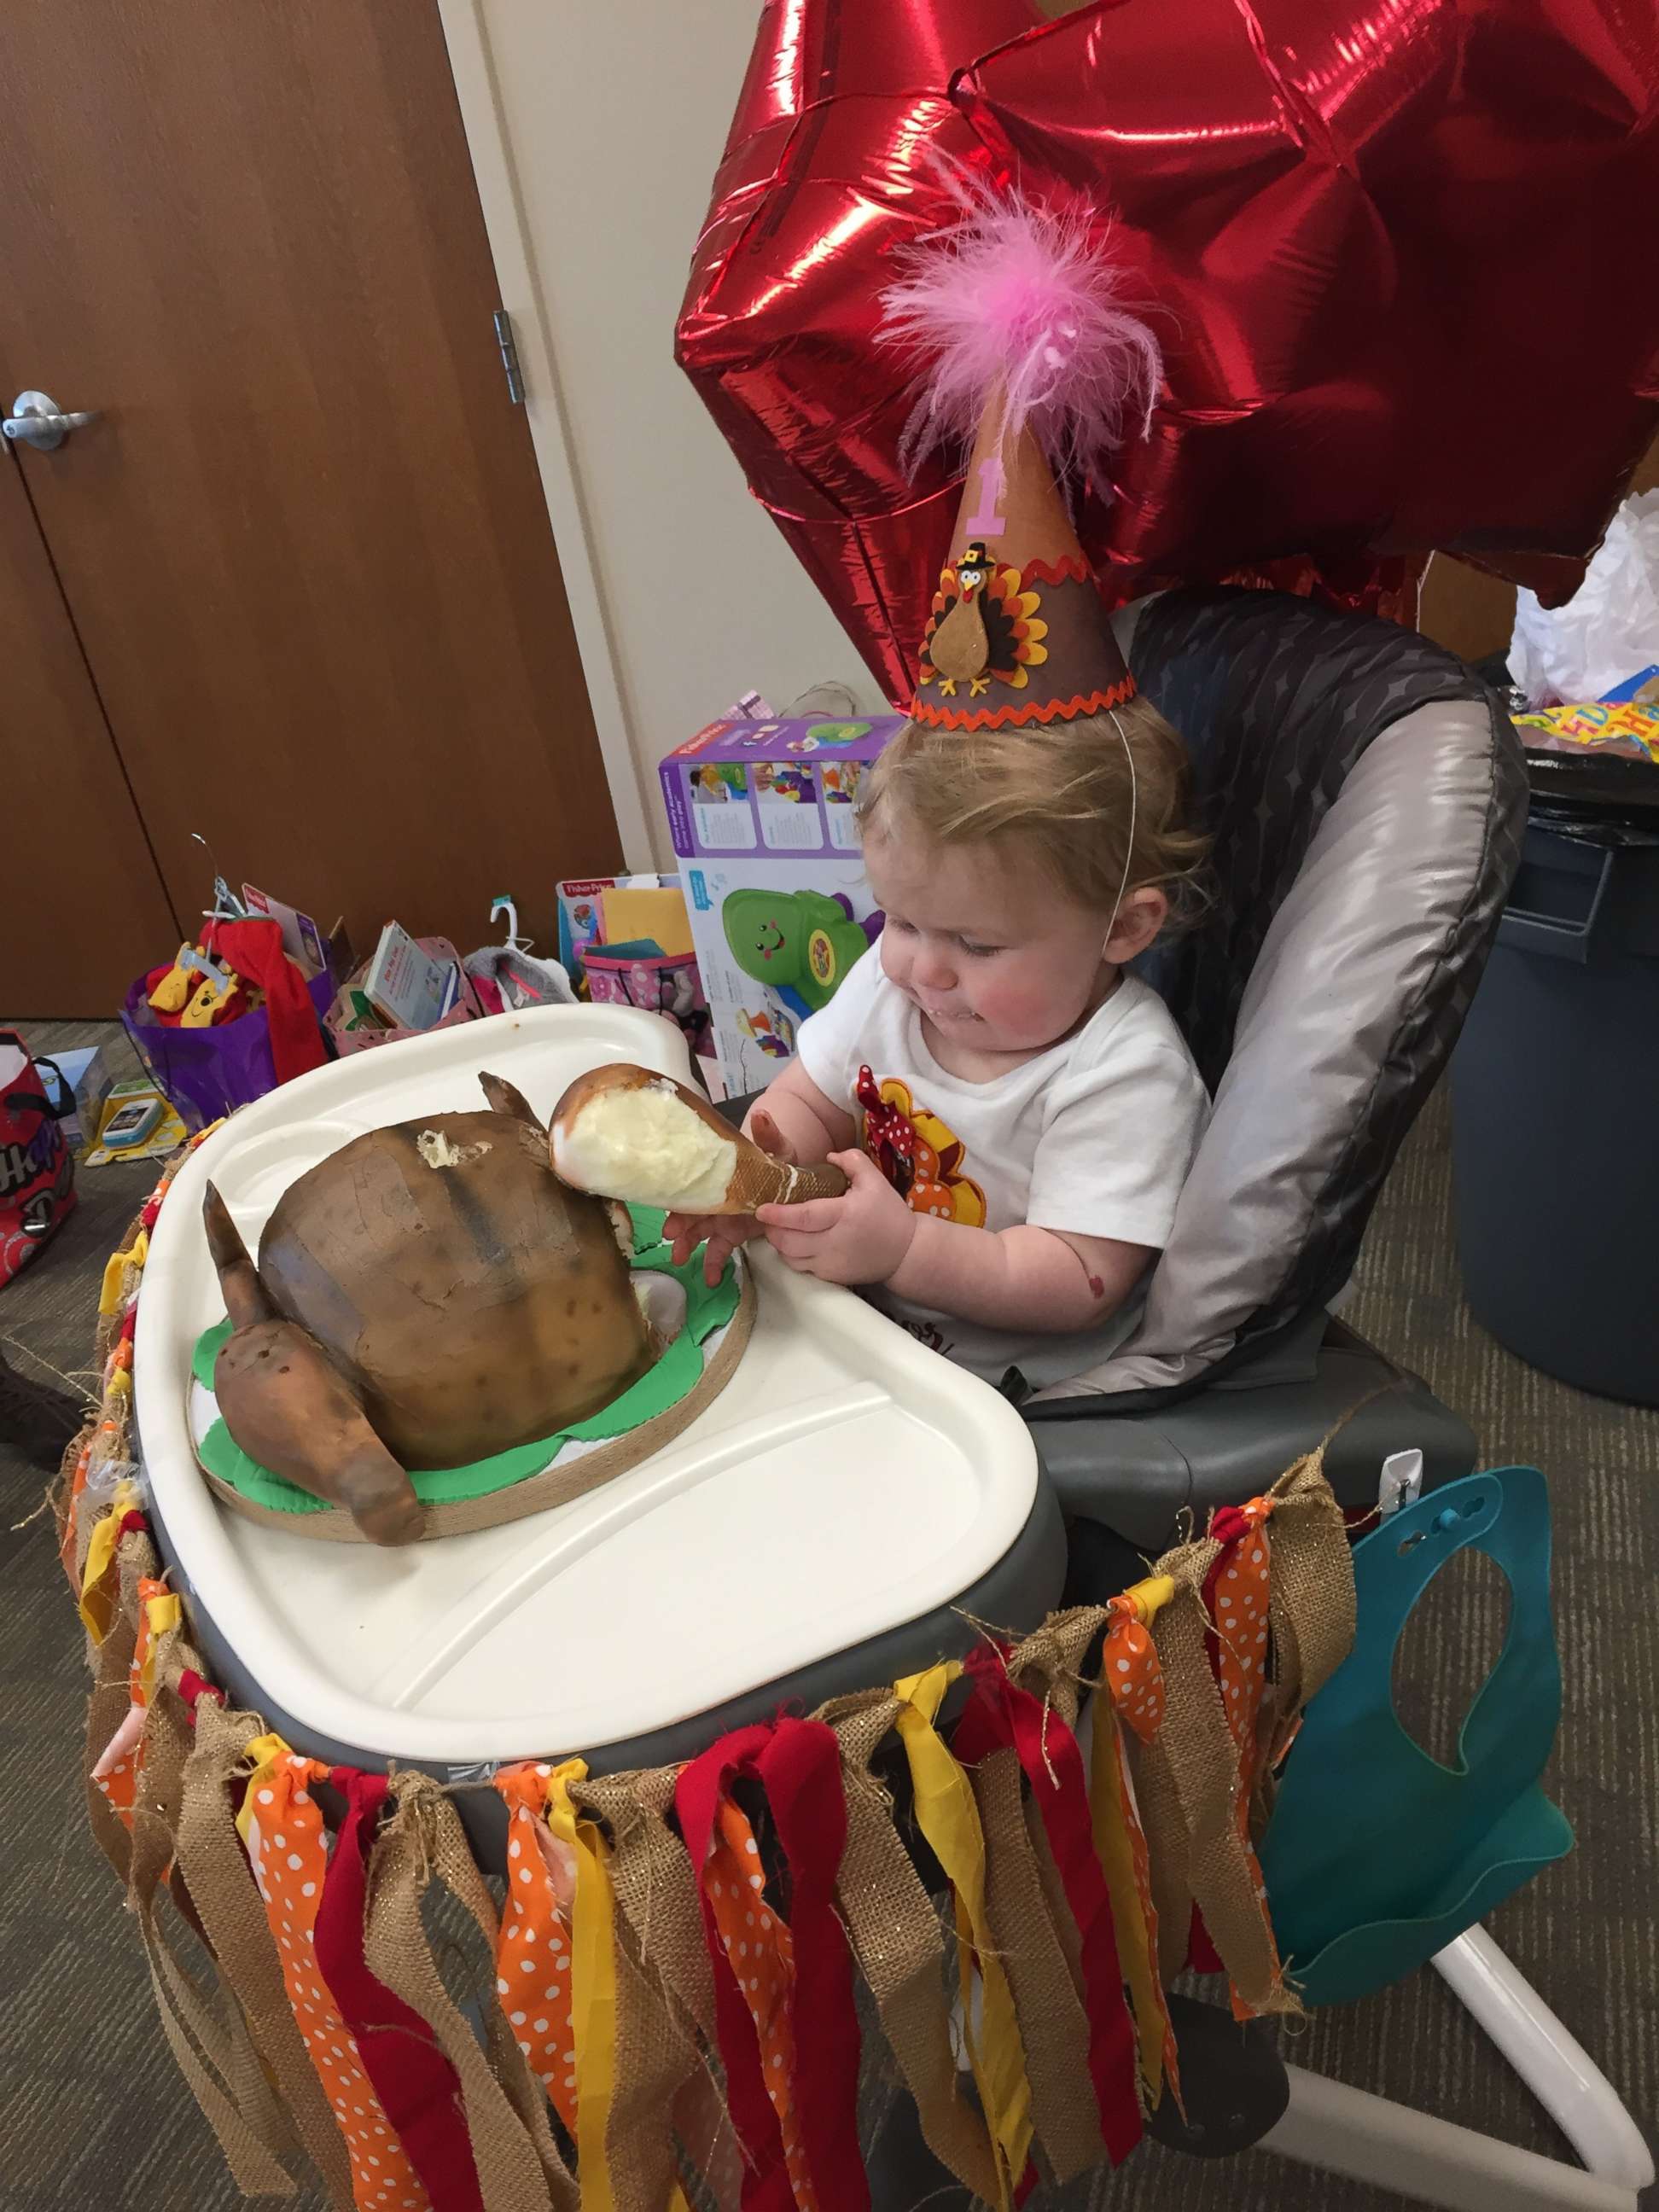 PHOTO: The Tallman family even got Eleanor a turkey shaped cake for her birthday party too, which they held on Saturday. 